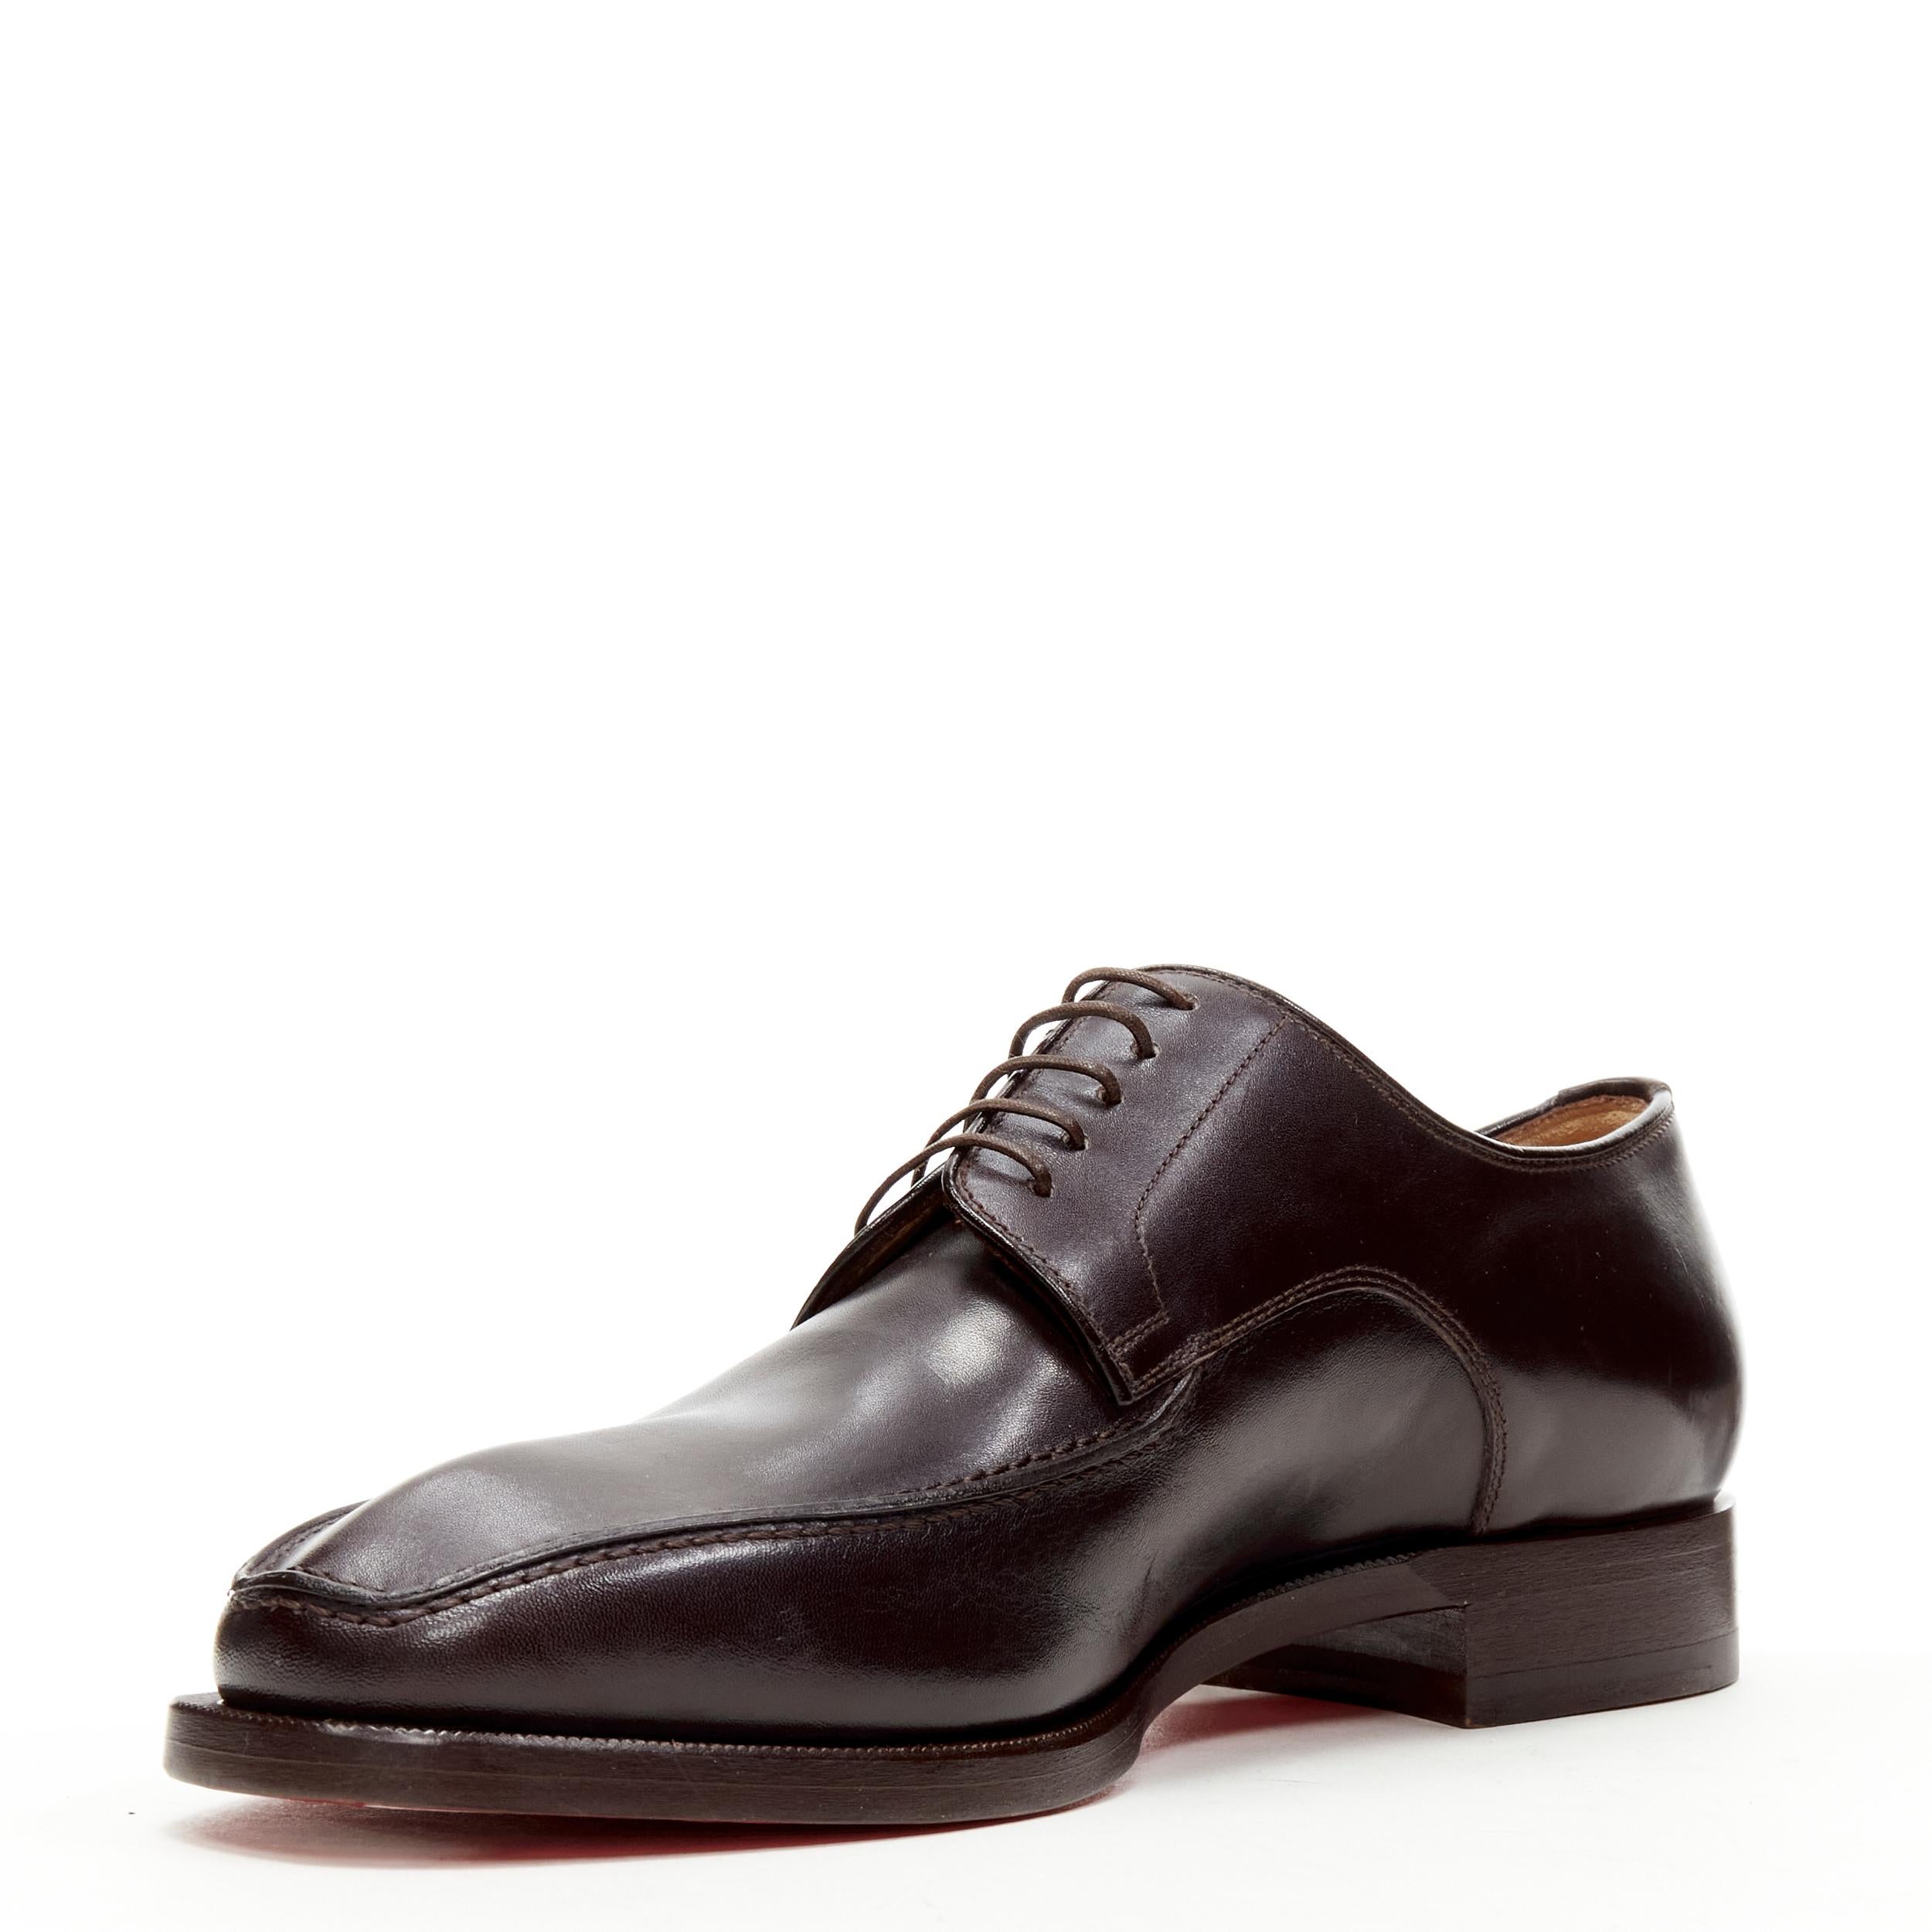 Black new CHRISTIAN LOUBOUTIN Cypriene Flat Vintage brown leather derby loafer EU42 For Sale